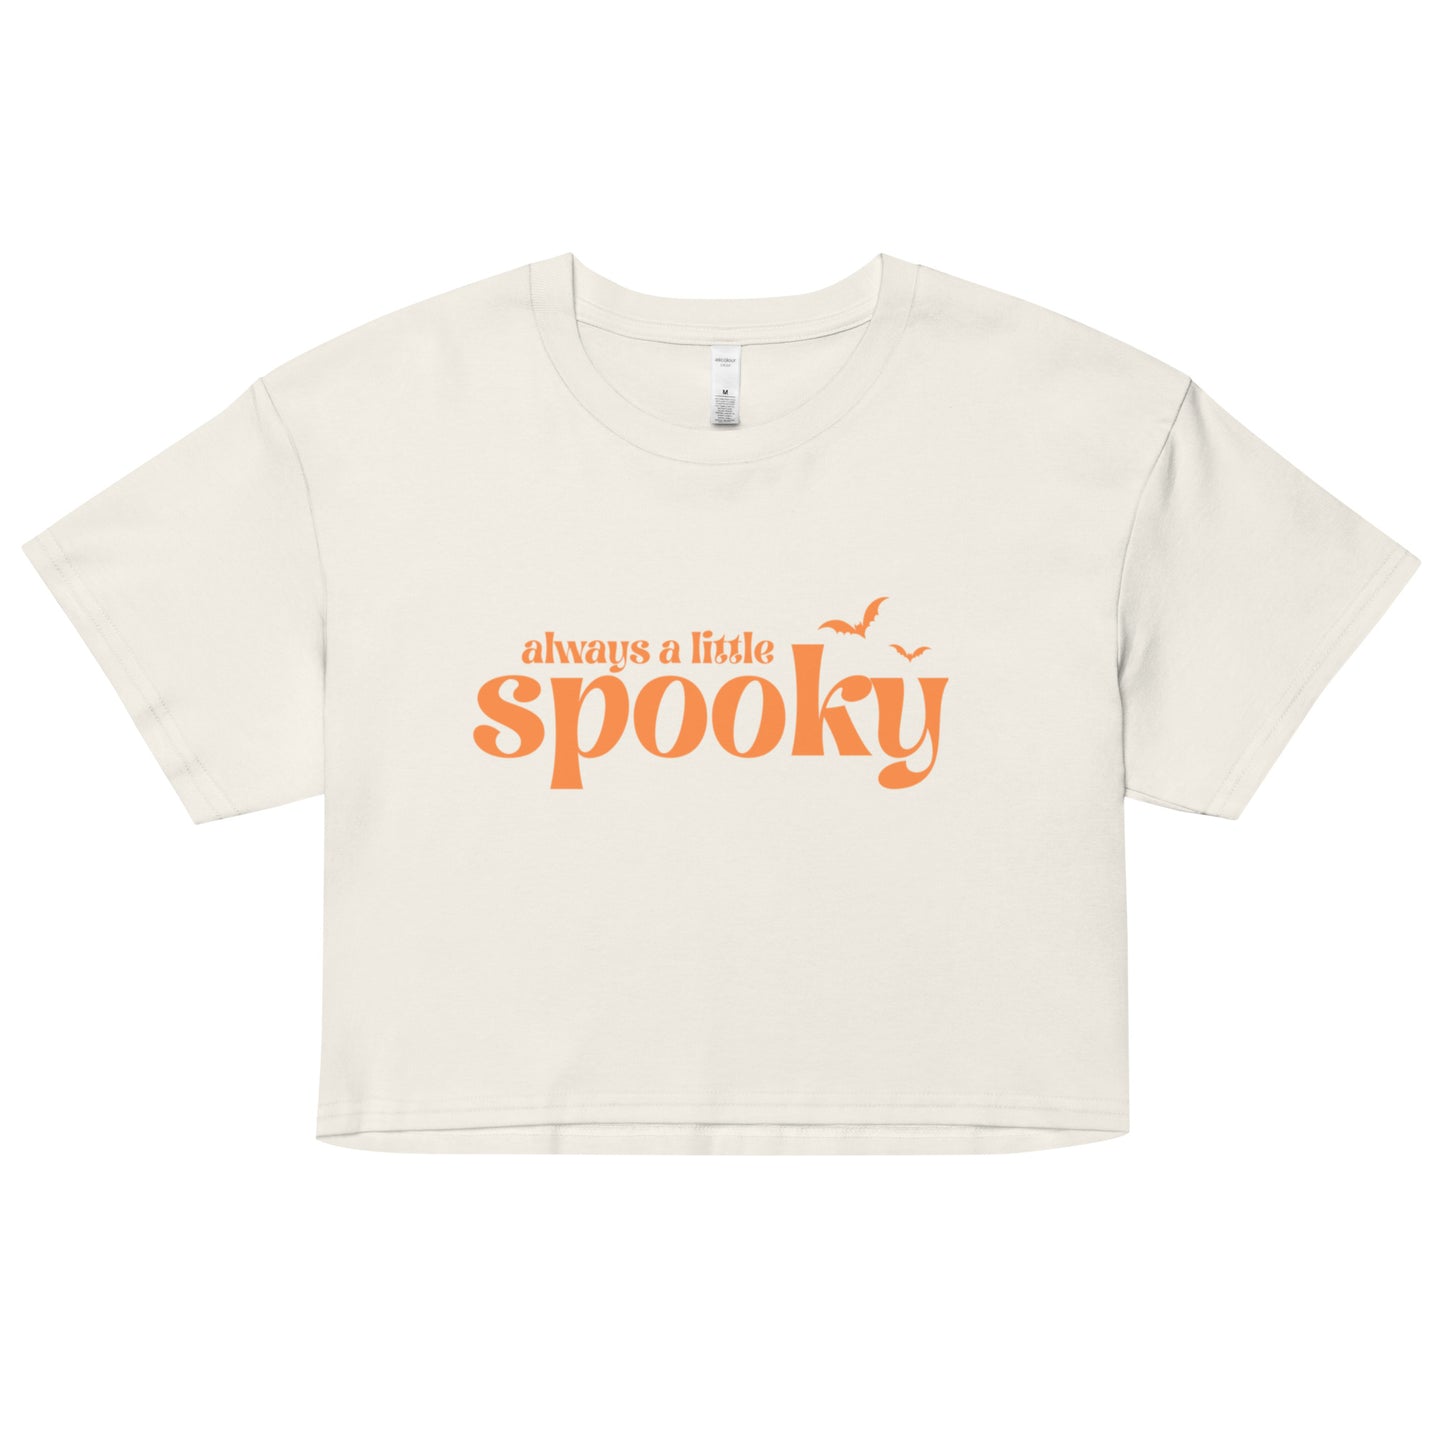 An off-white, cropped t-shirt that says "always a little spooky" in a trendy orange font